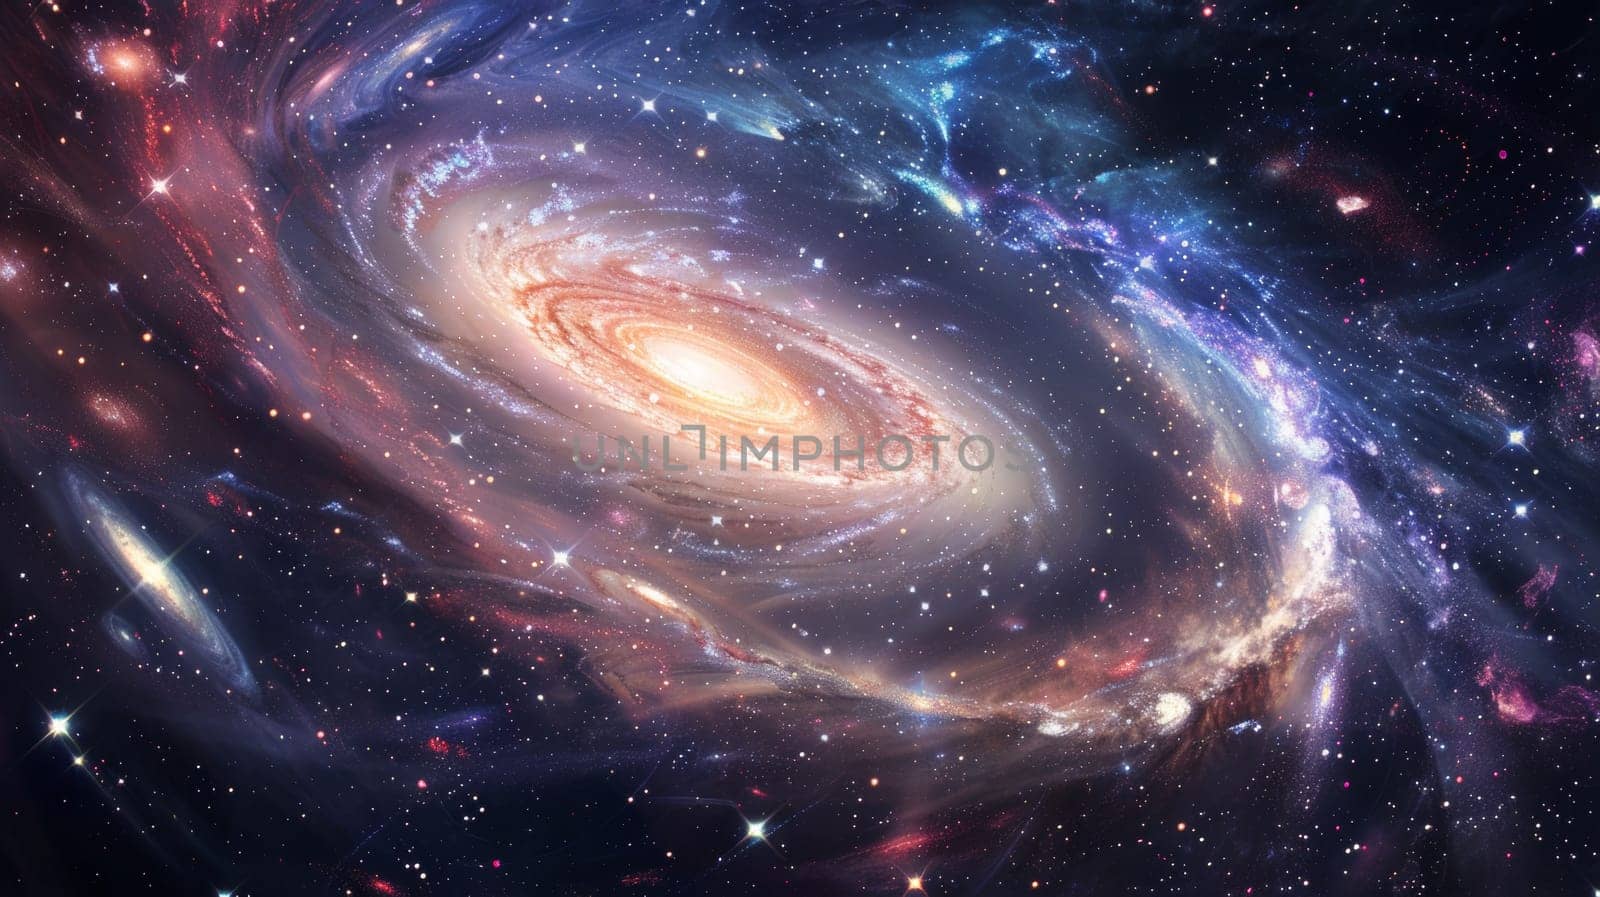 A spiral galaxy in space with stars and a bright blue center